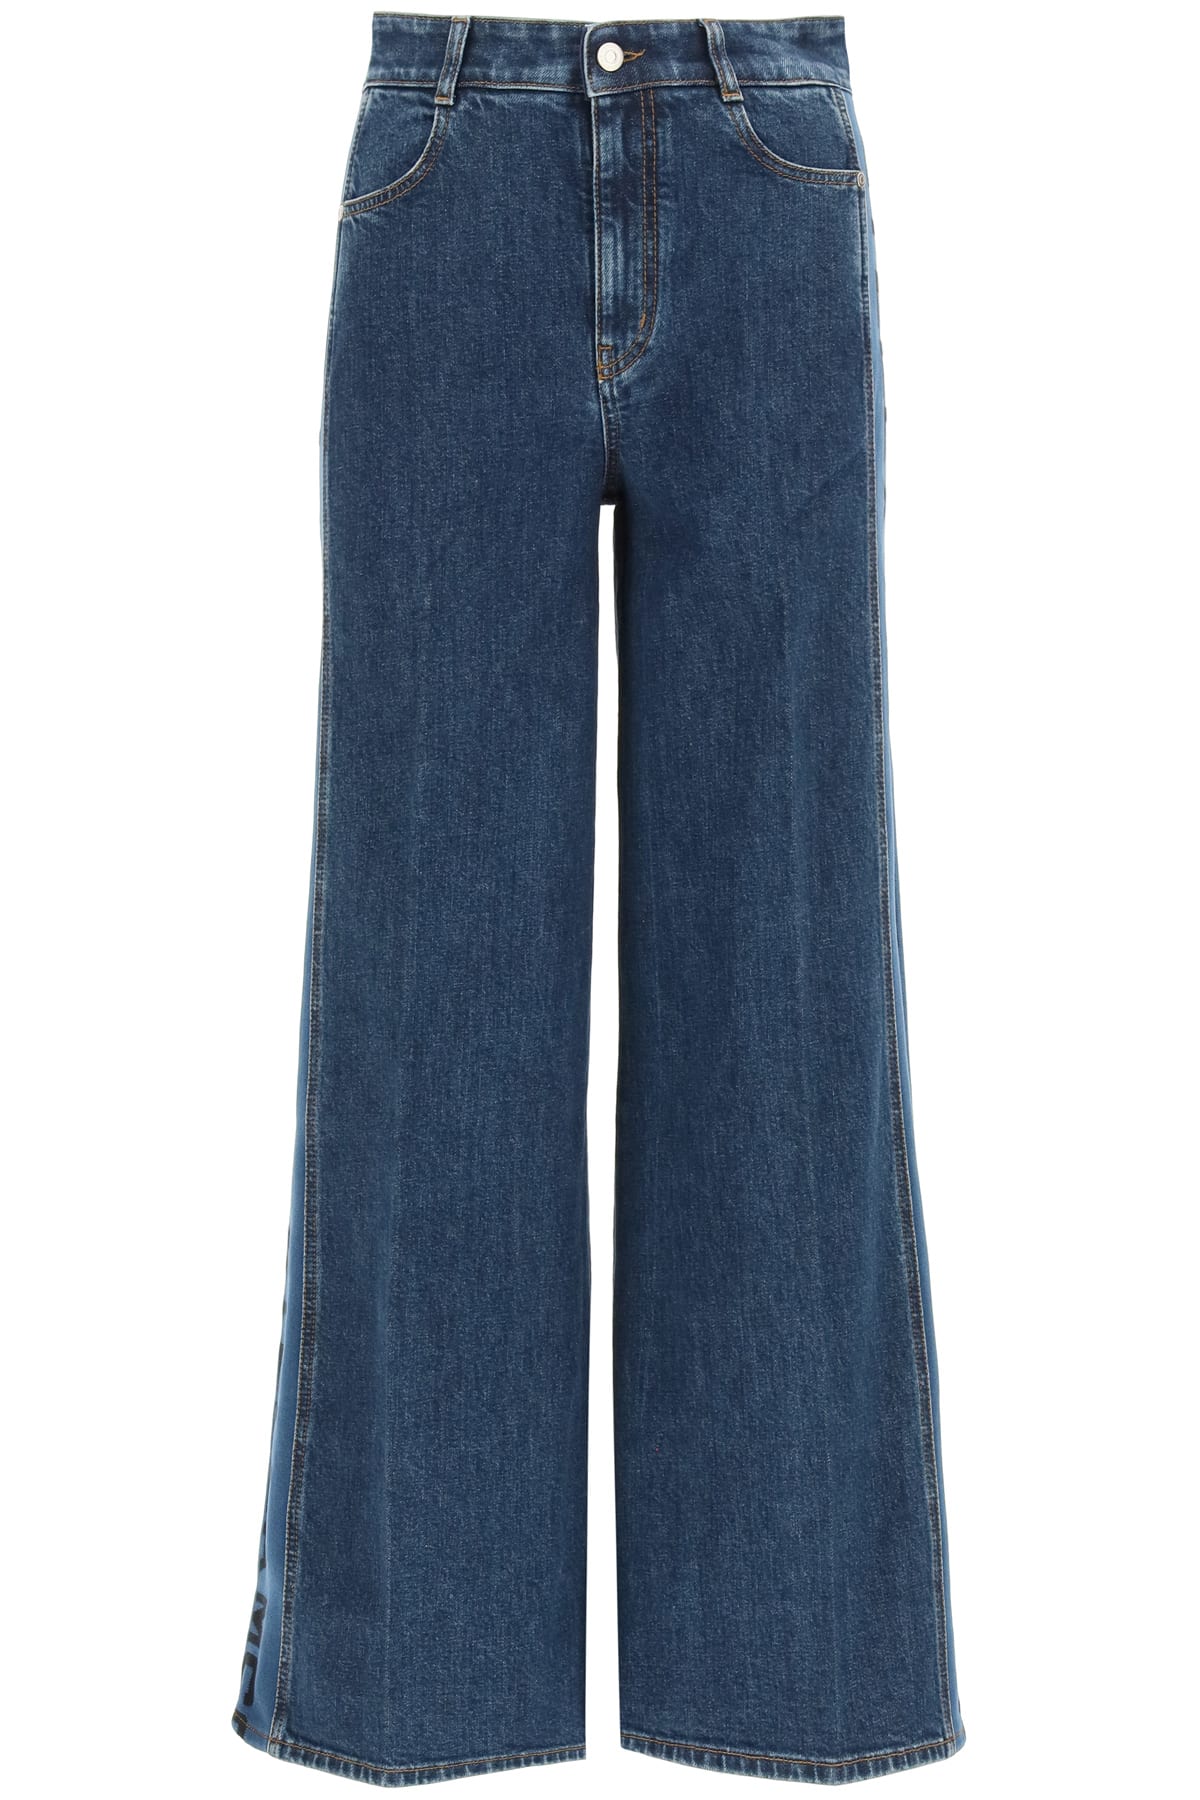 Stella McCartney Flare Jeans With Logo Bands